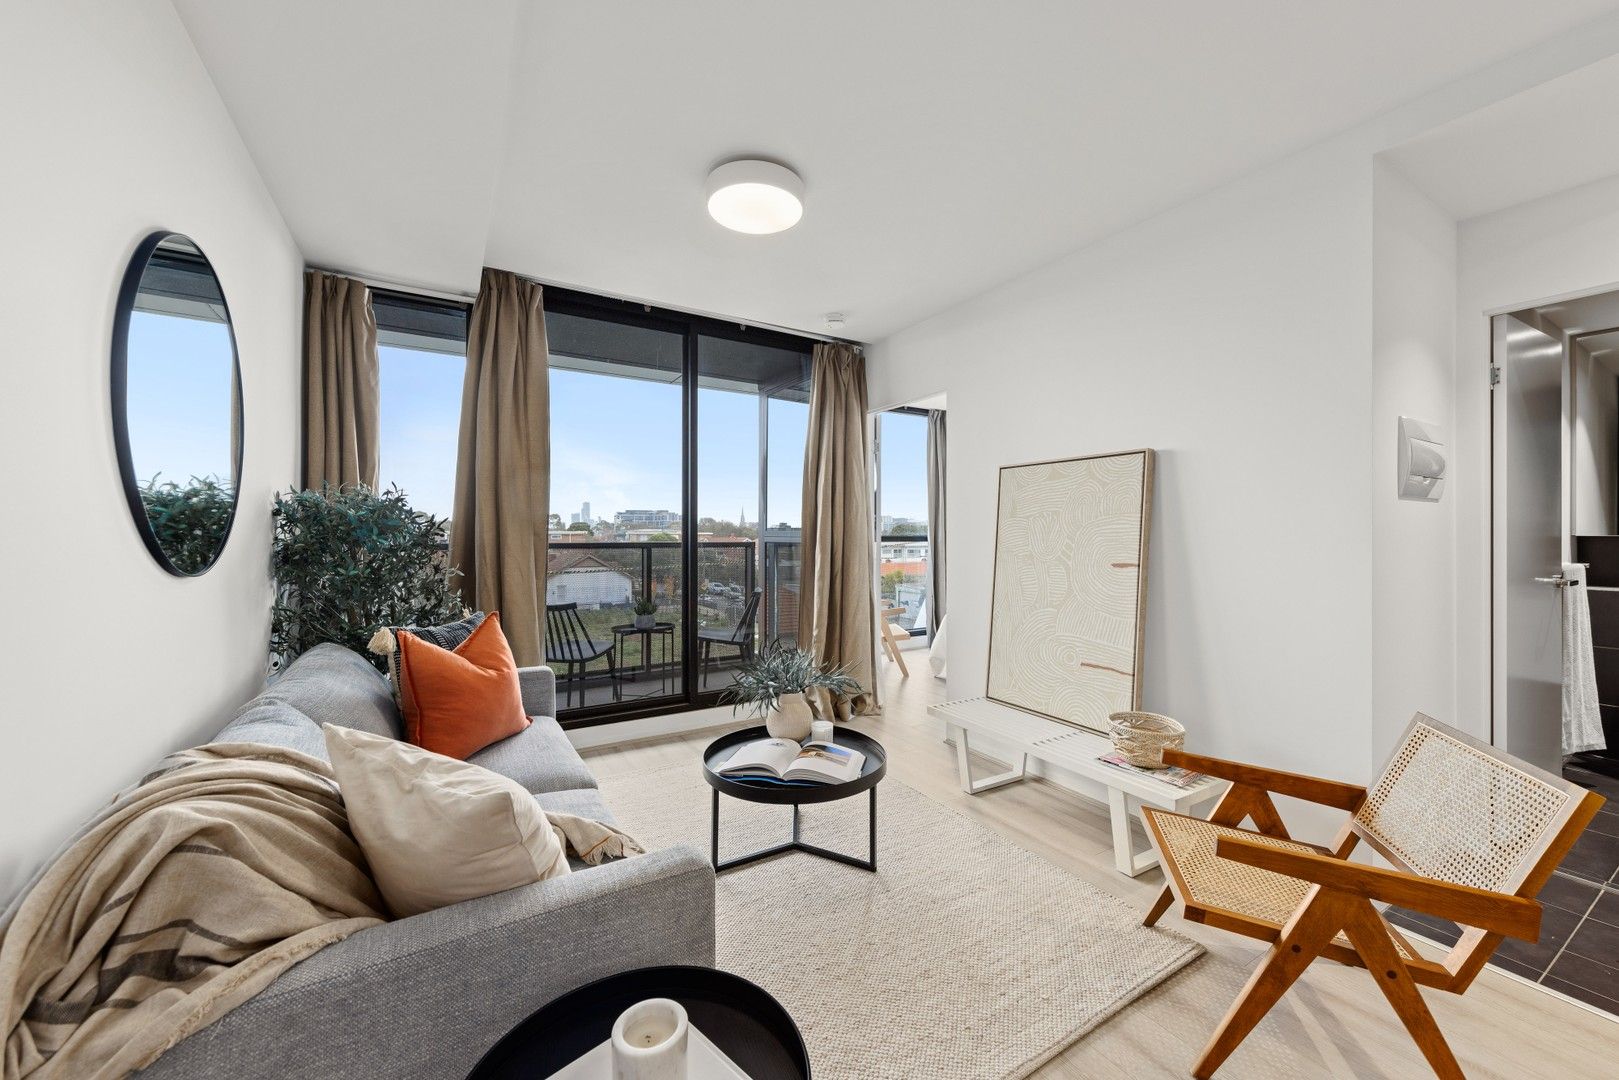 2 bedrooms Apartment / Unit / Flat in A309/8 Grosvenor Street ABBOTSFORD VIC, 3067